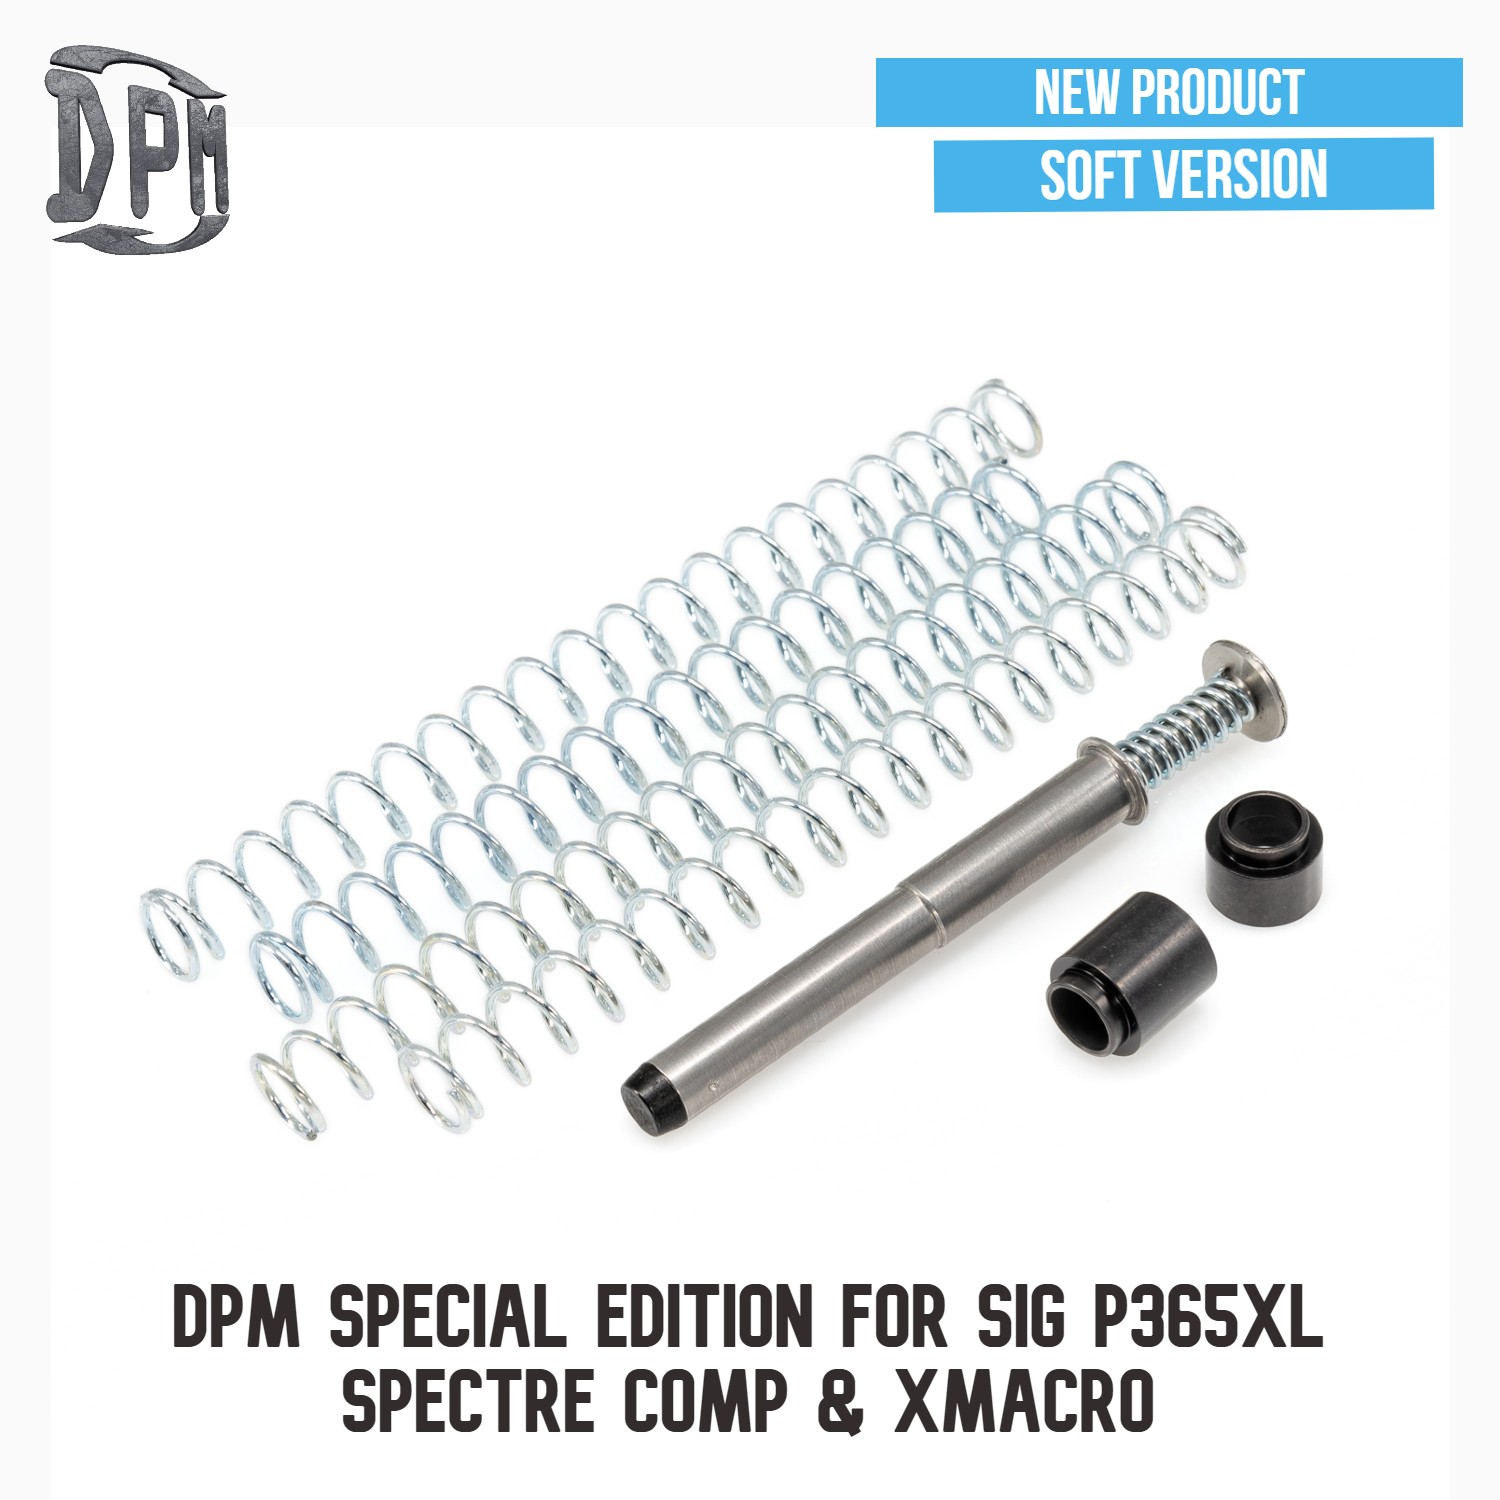 DPM-Special-Edition-For-SIG-P365XL-SPECTRE-COMP-XMACRO